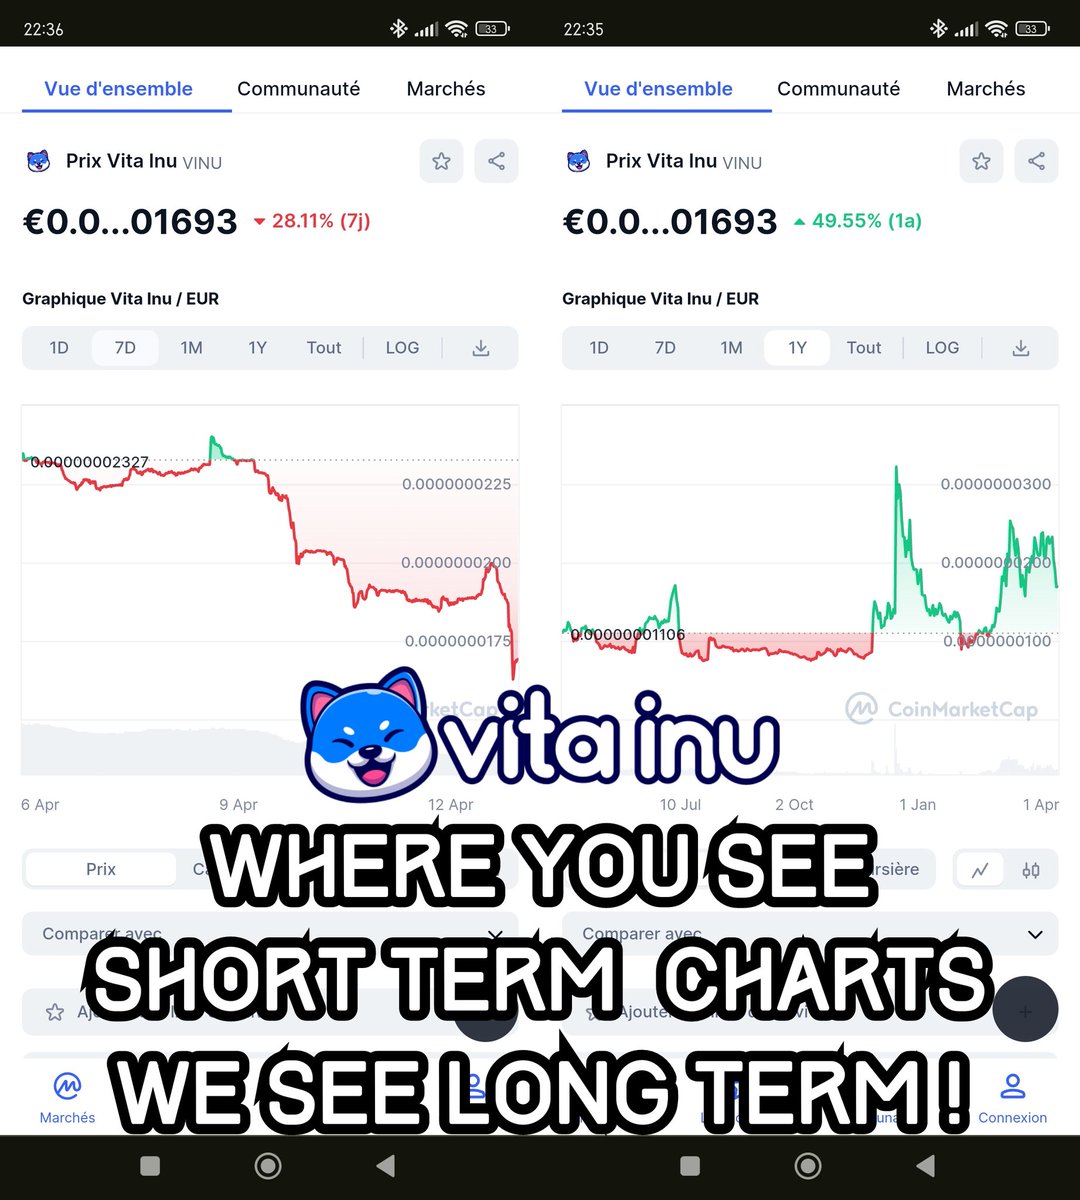 Where some see Short-term gains, we envision Long-term success. 📈🚀

@VitaInuCoin isn't just a trend, it's a journey towards a brighter future in crypto. 

🪖 Join us as we build something truly remarkable. 

#VitaInuCoin #cryptocurrency #longtermvision